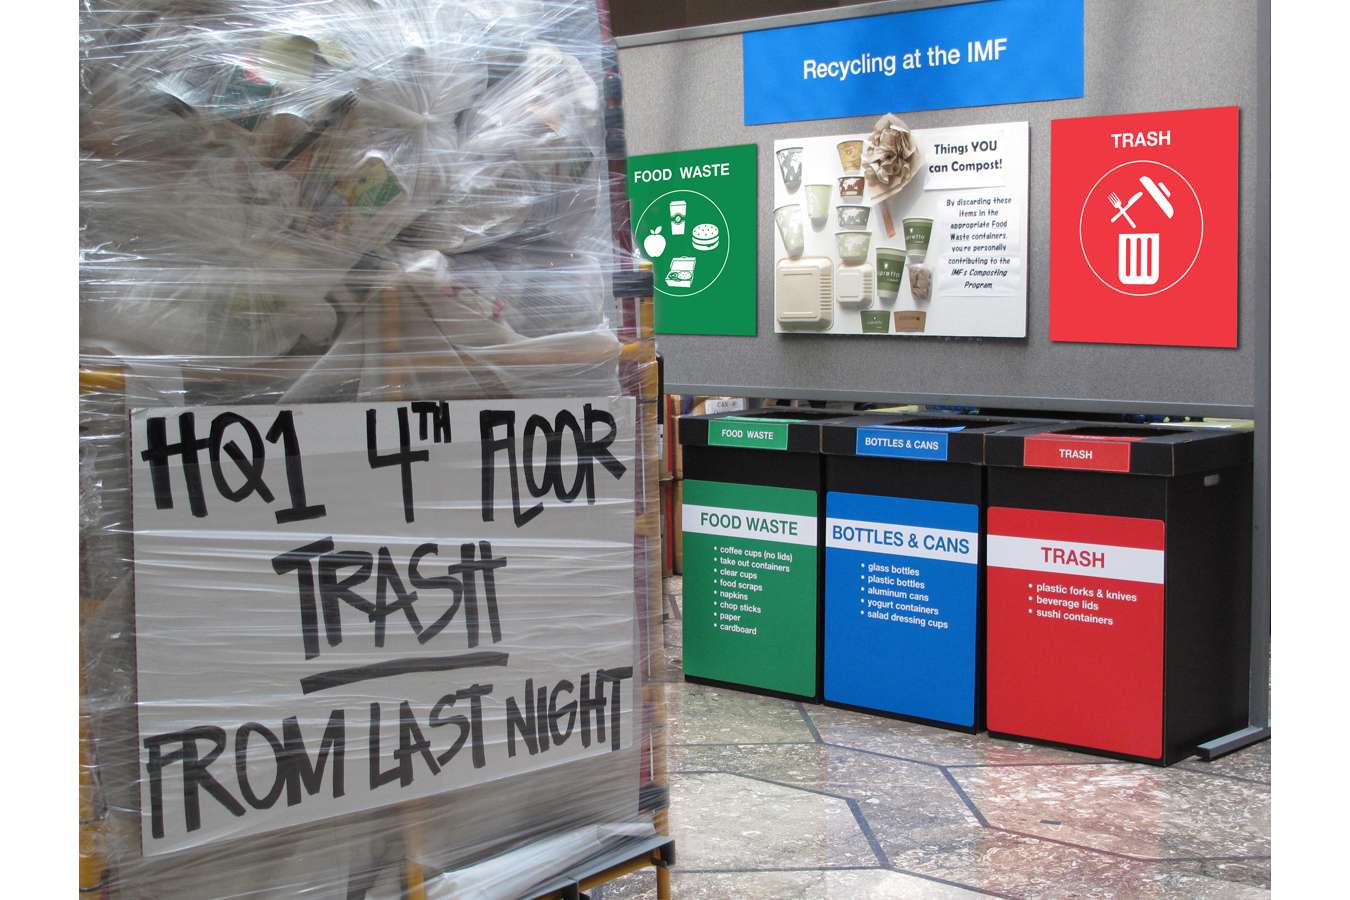 Logo 27 : IMF headquarters display shows volume of paper waste from one floor on one day